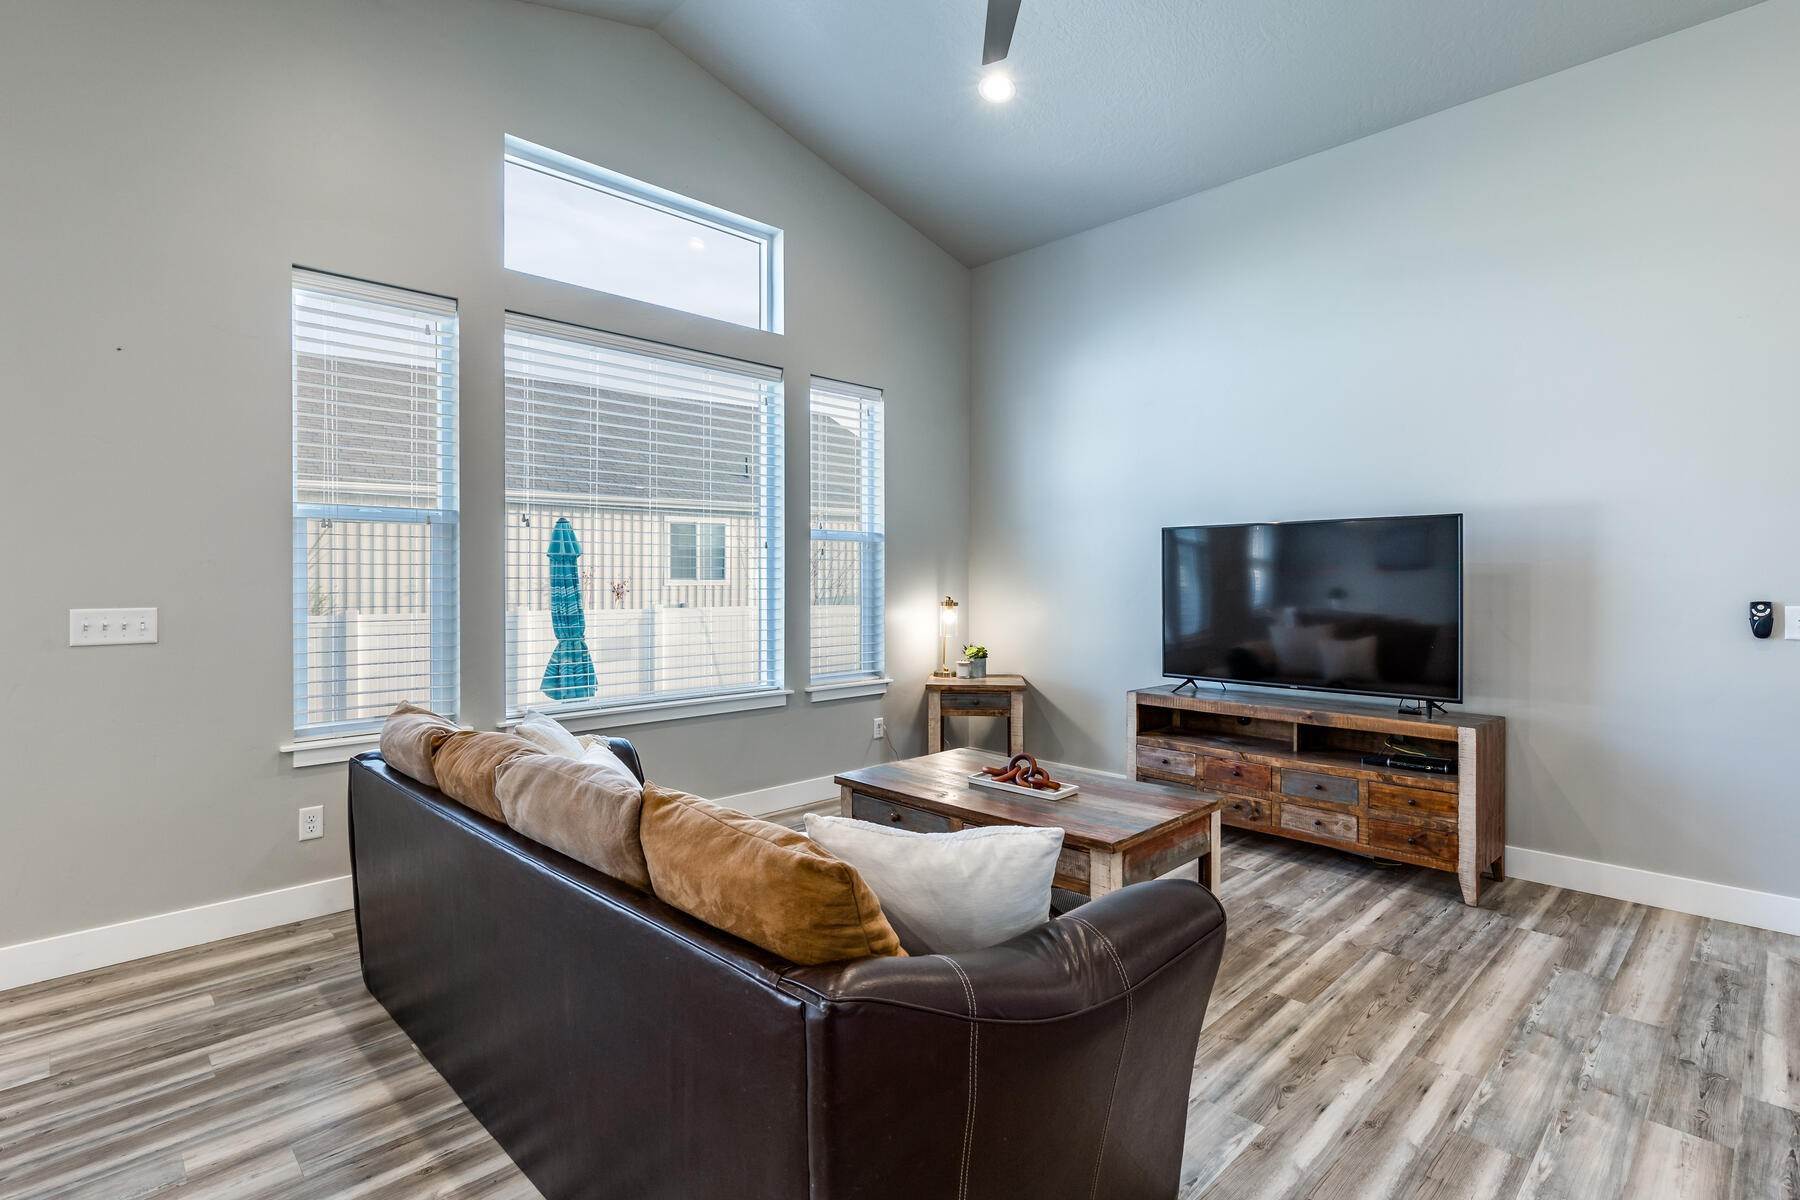 5. Single Family Homes for Sale at Home is a Sanctuary From the World, and This is the Perfect Place to Rejuvenate 166 E 1985 S Heber City, Utah 84032 United States